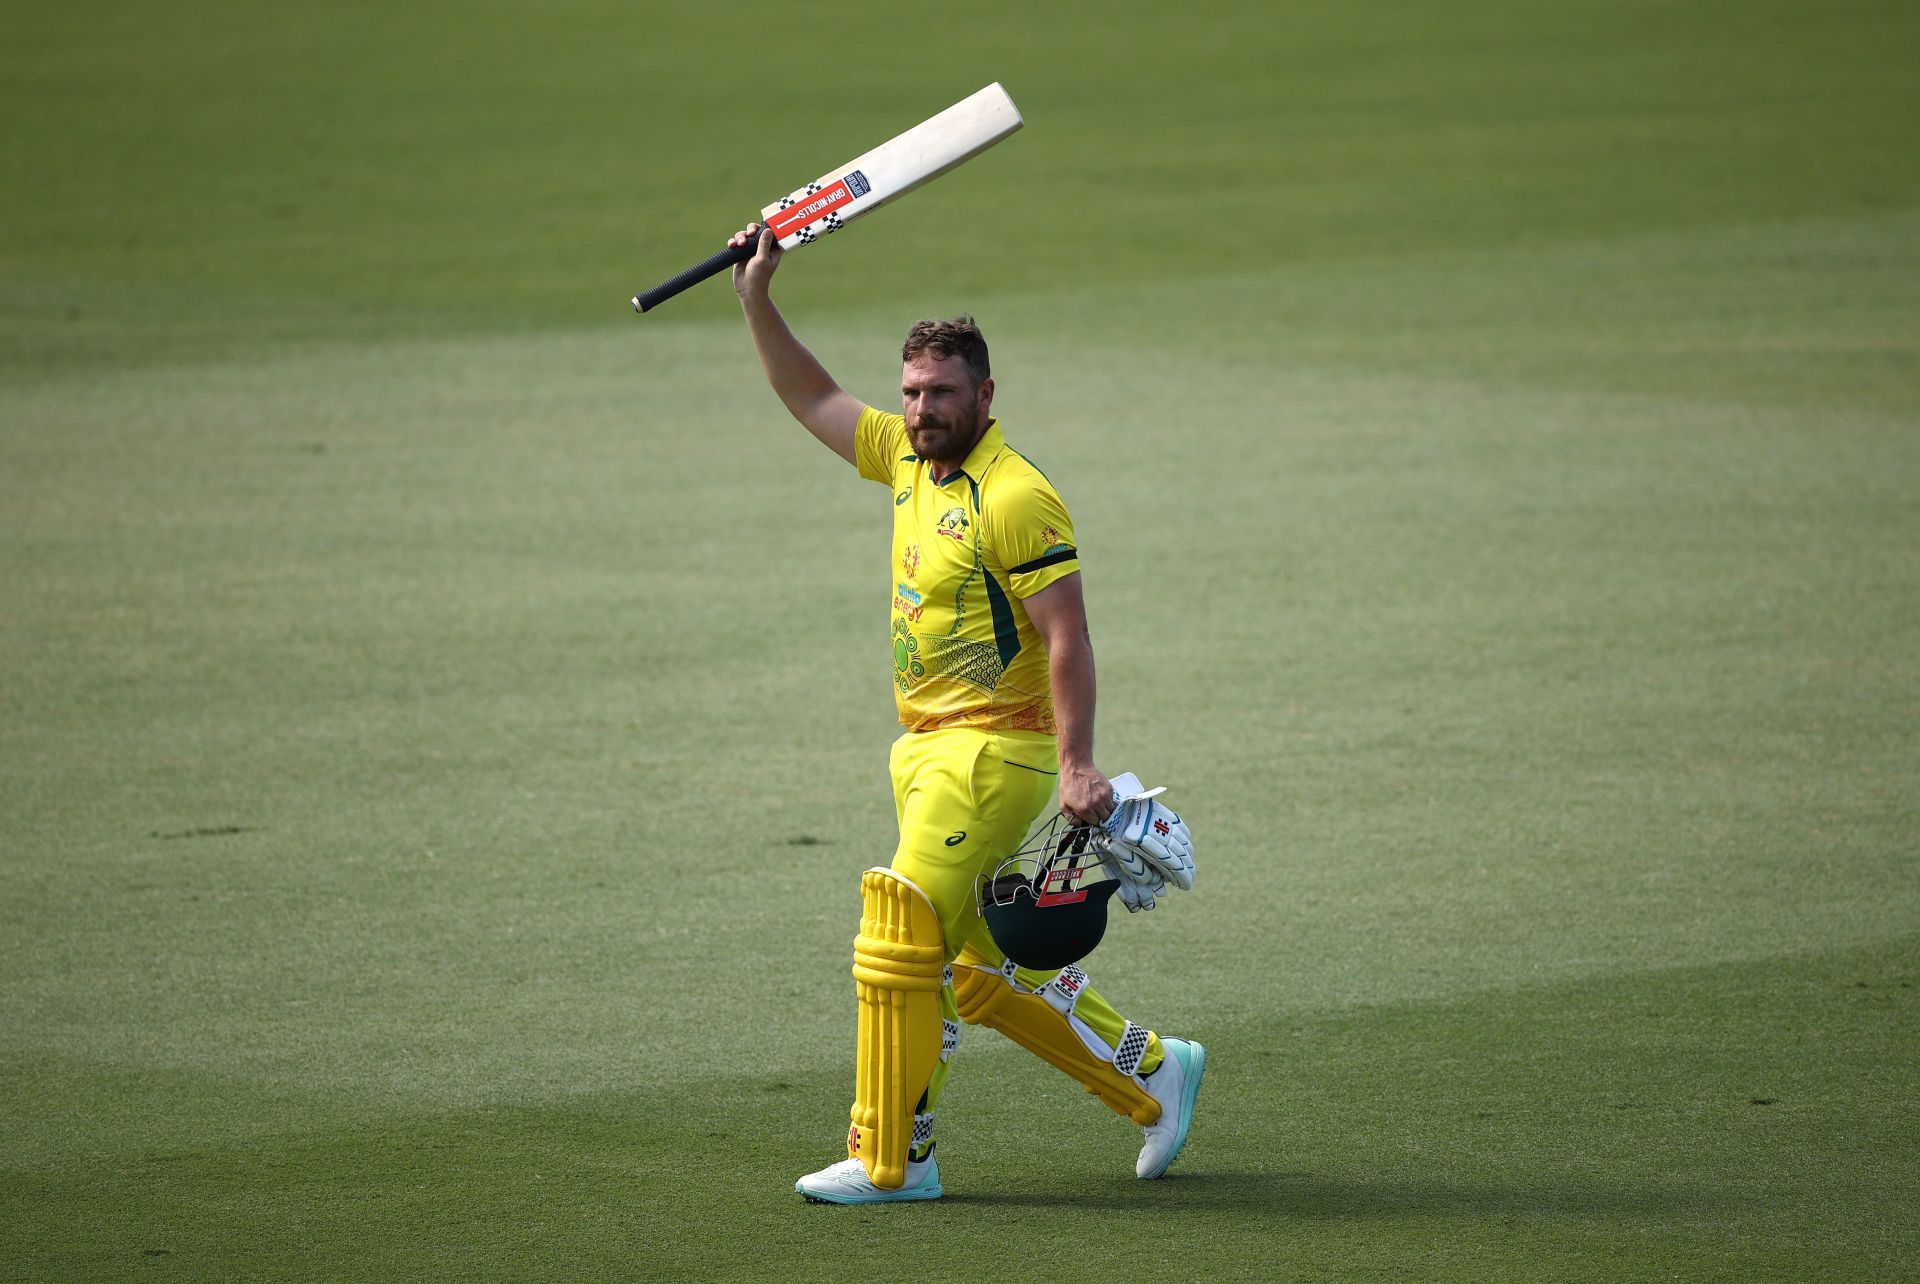 Aaron Finch has the fourth-highest number of ODI centuries for Australia. (Credits: Getty)